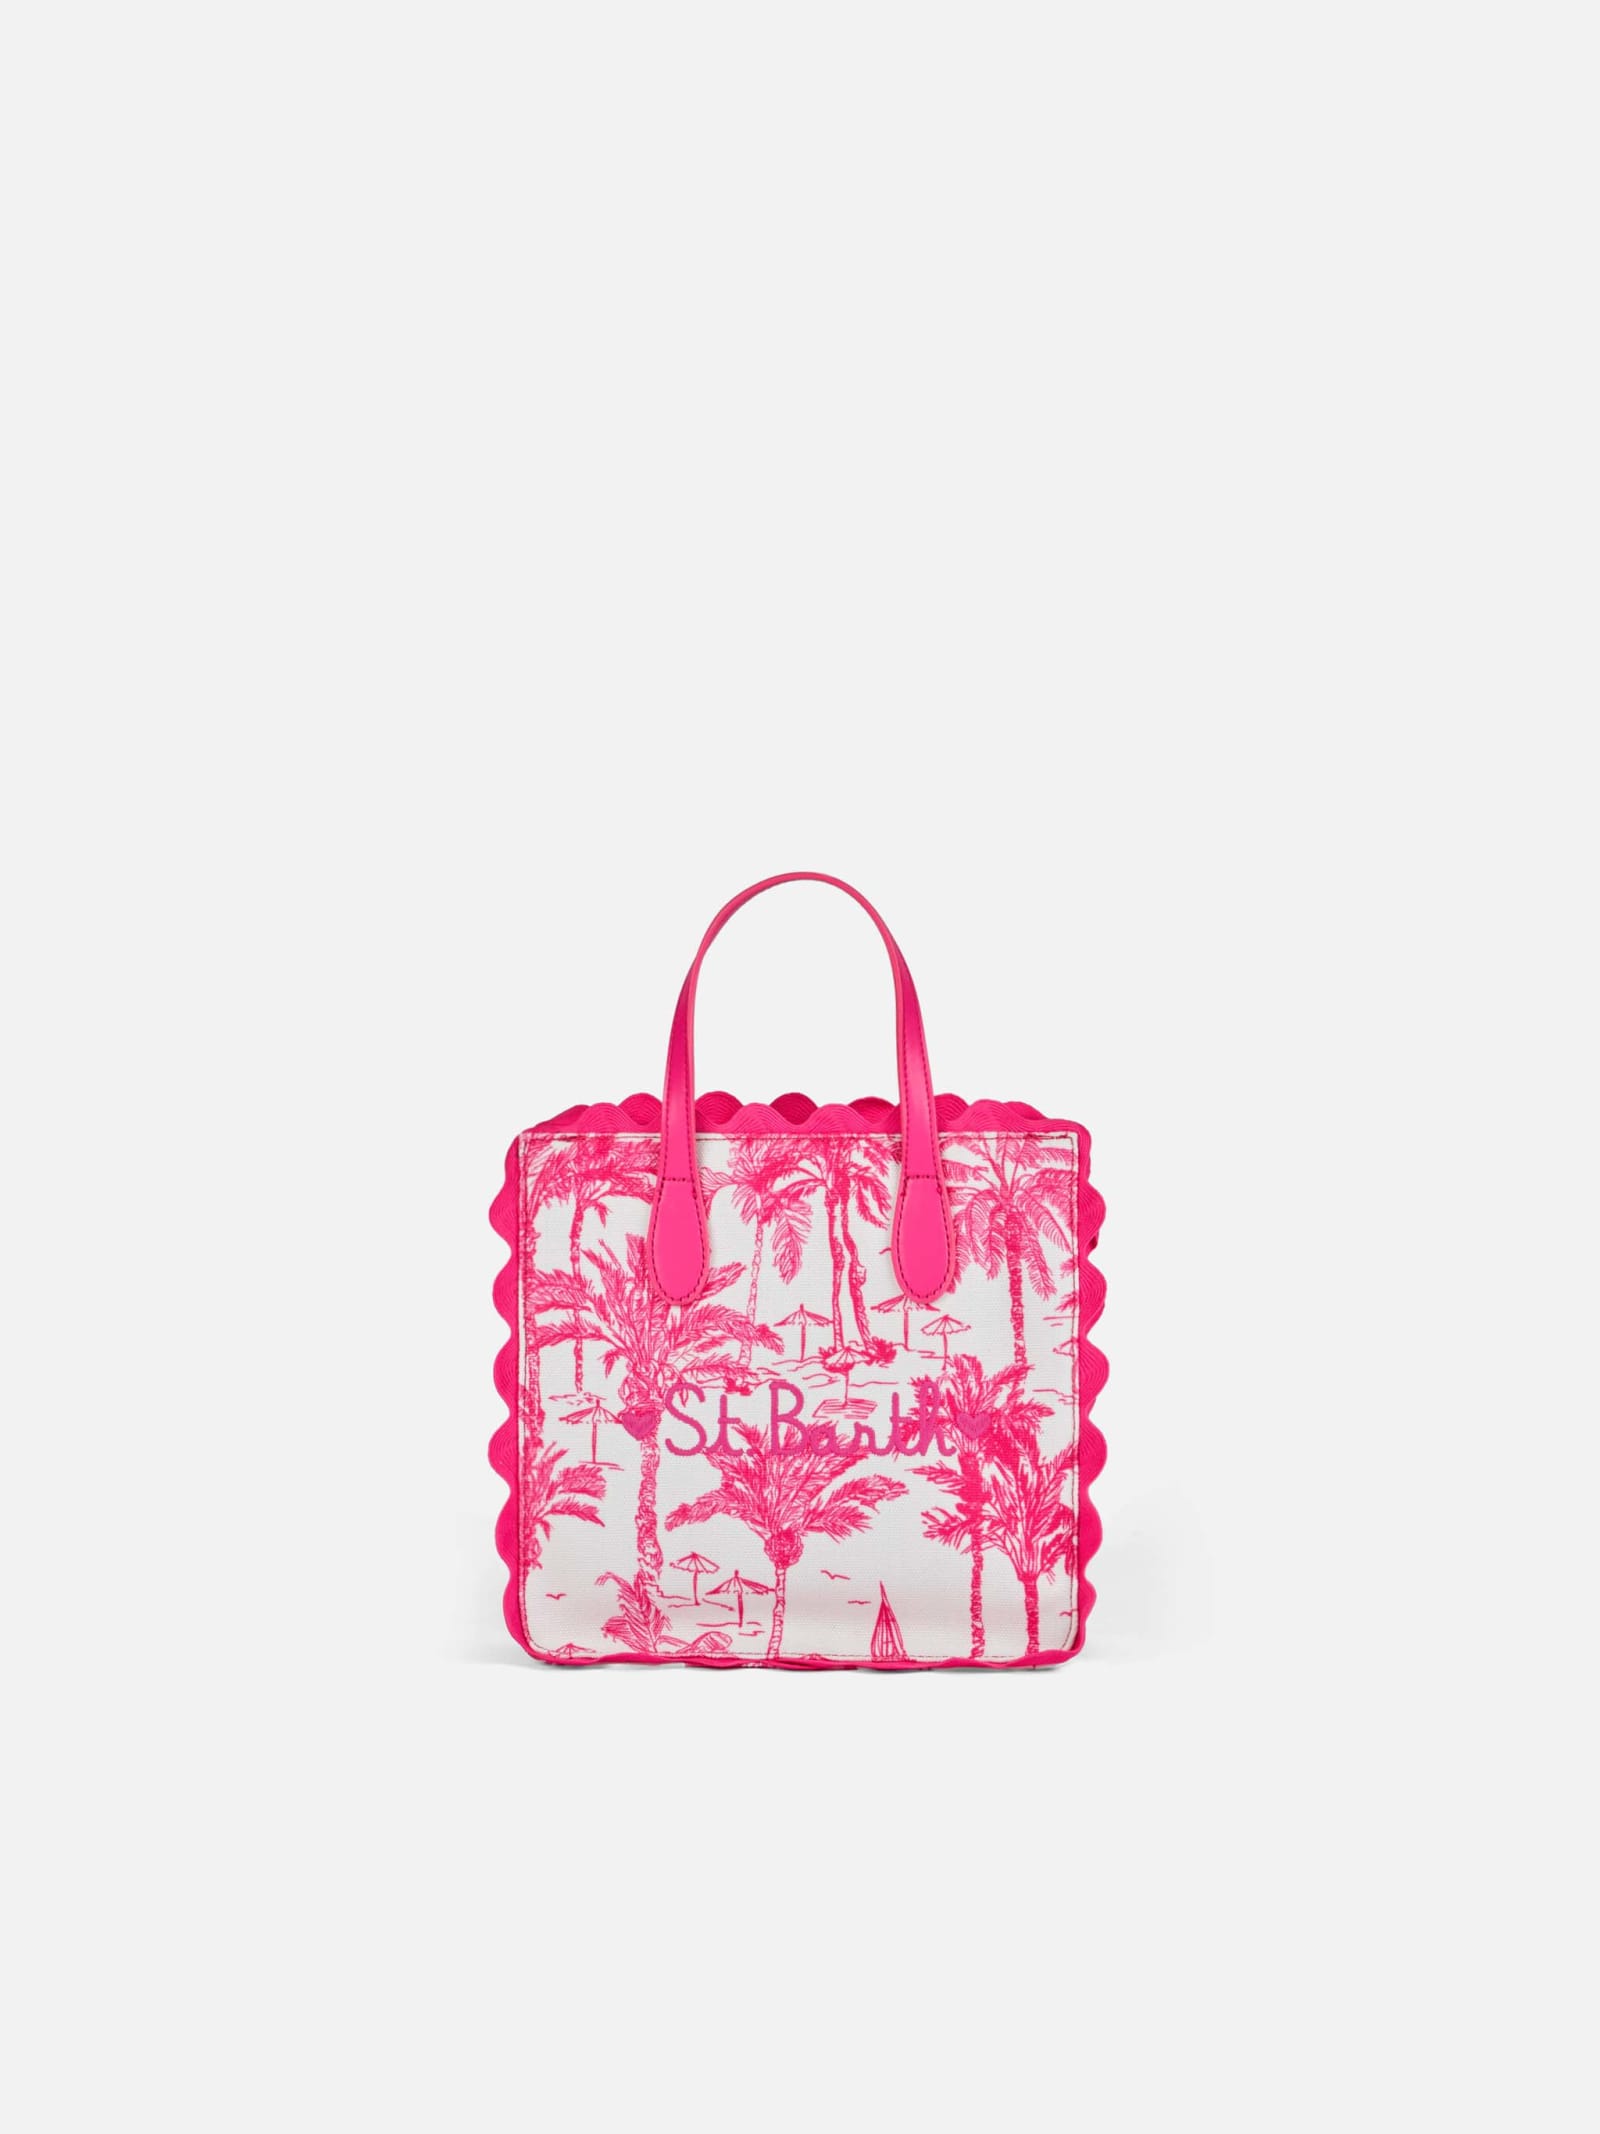 Mc2 Saint Barth Handbag With Front Embroidery And Pink Toile De Jouy